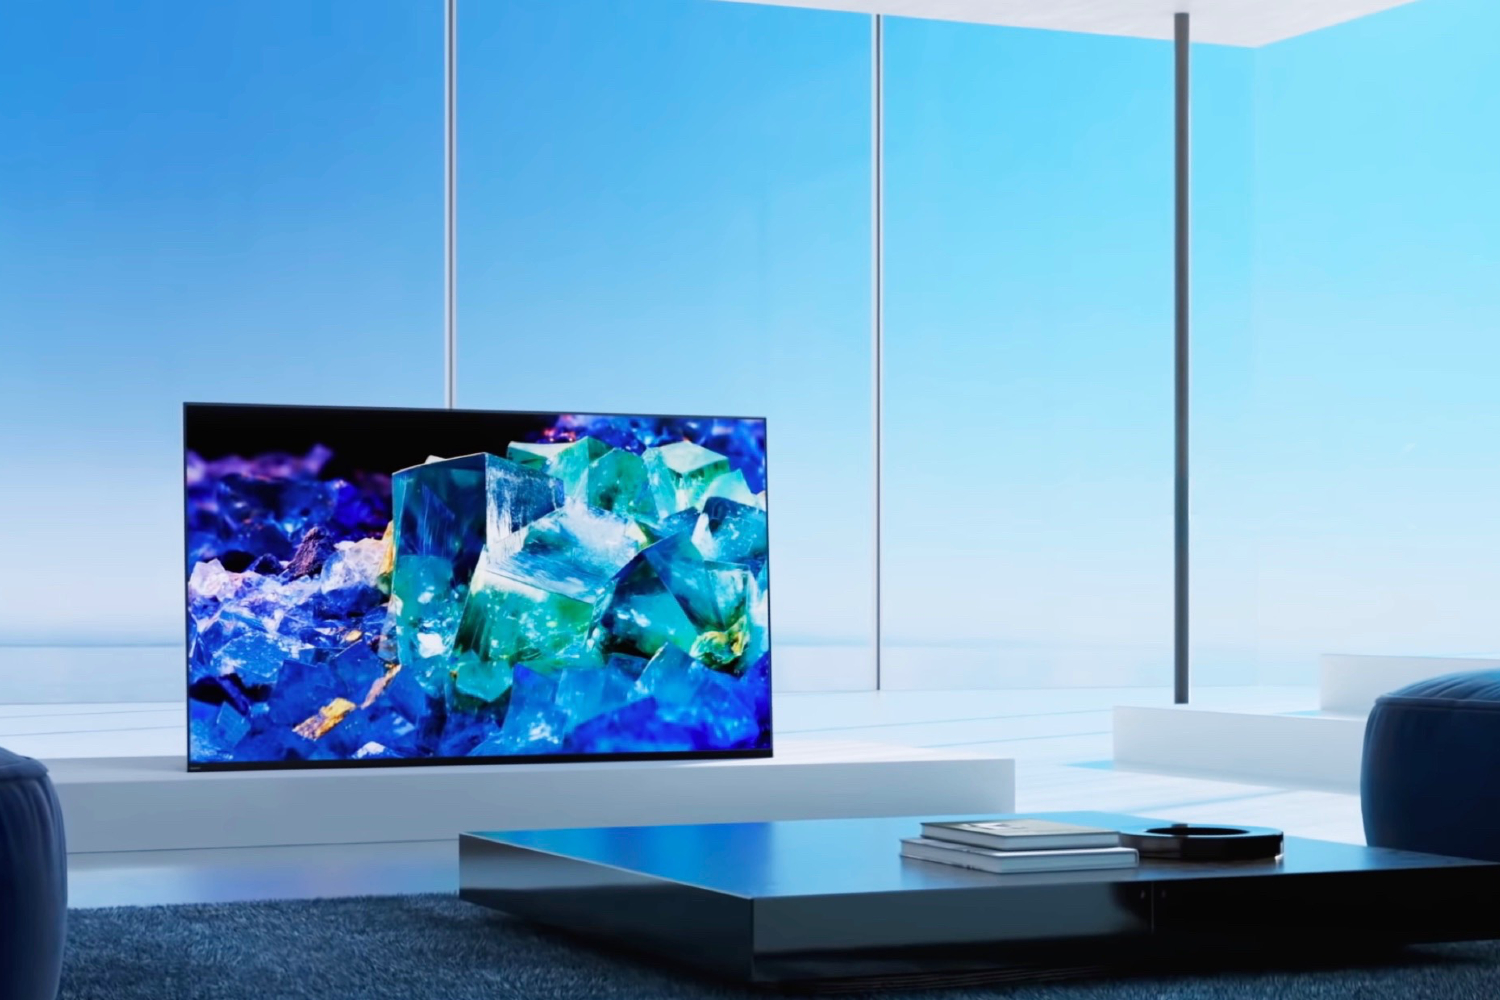 A Sony Bravia A80K 4K TV sits on the table in front of the large screen.